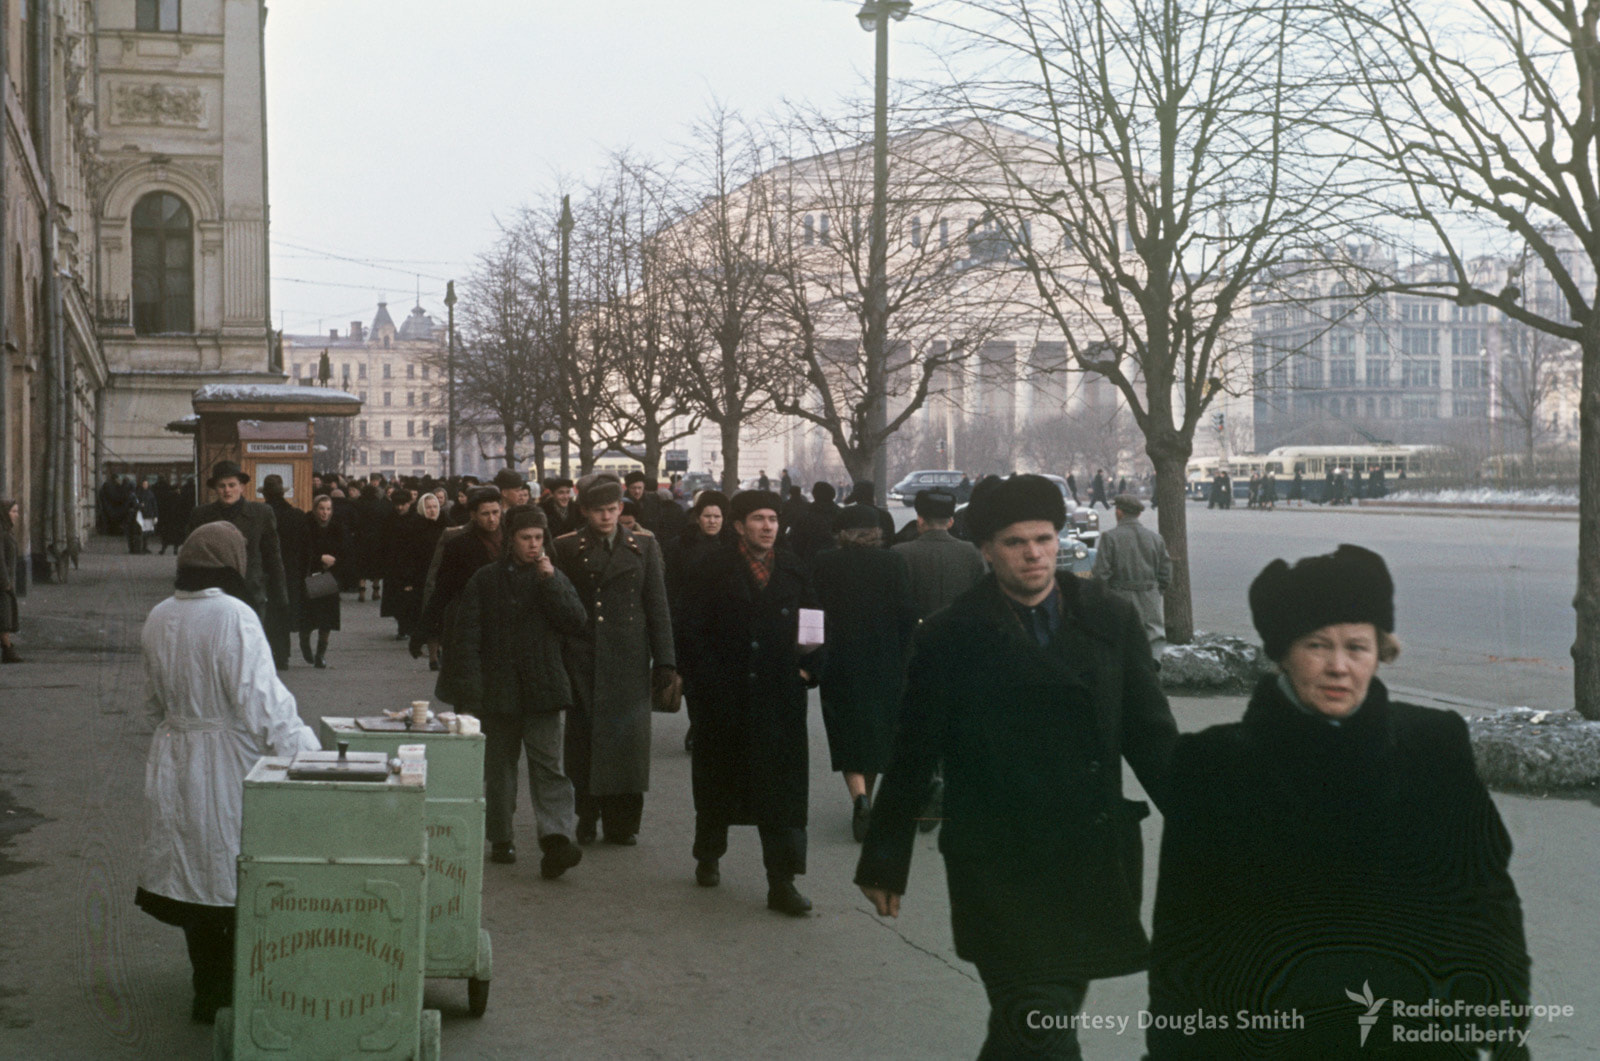 Photographs of Life in the Soviet Union in the 1950s Taken by a U.S. Diplomat